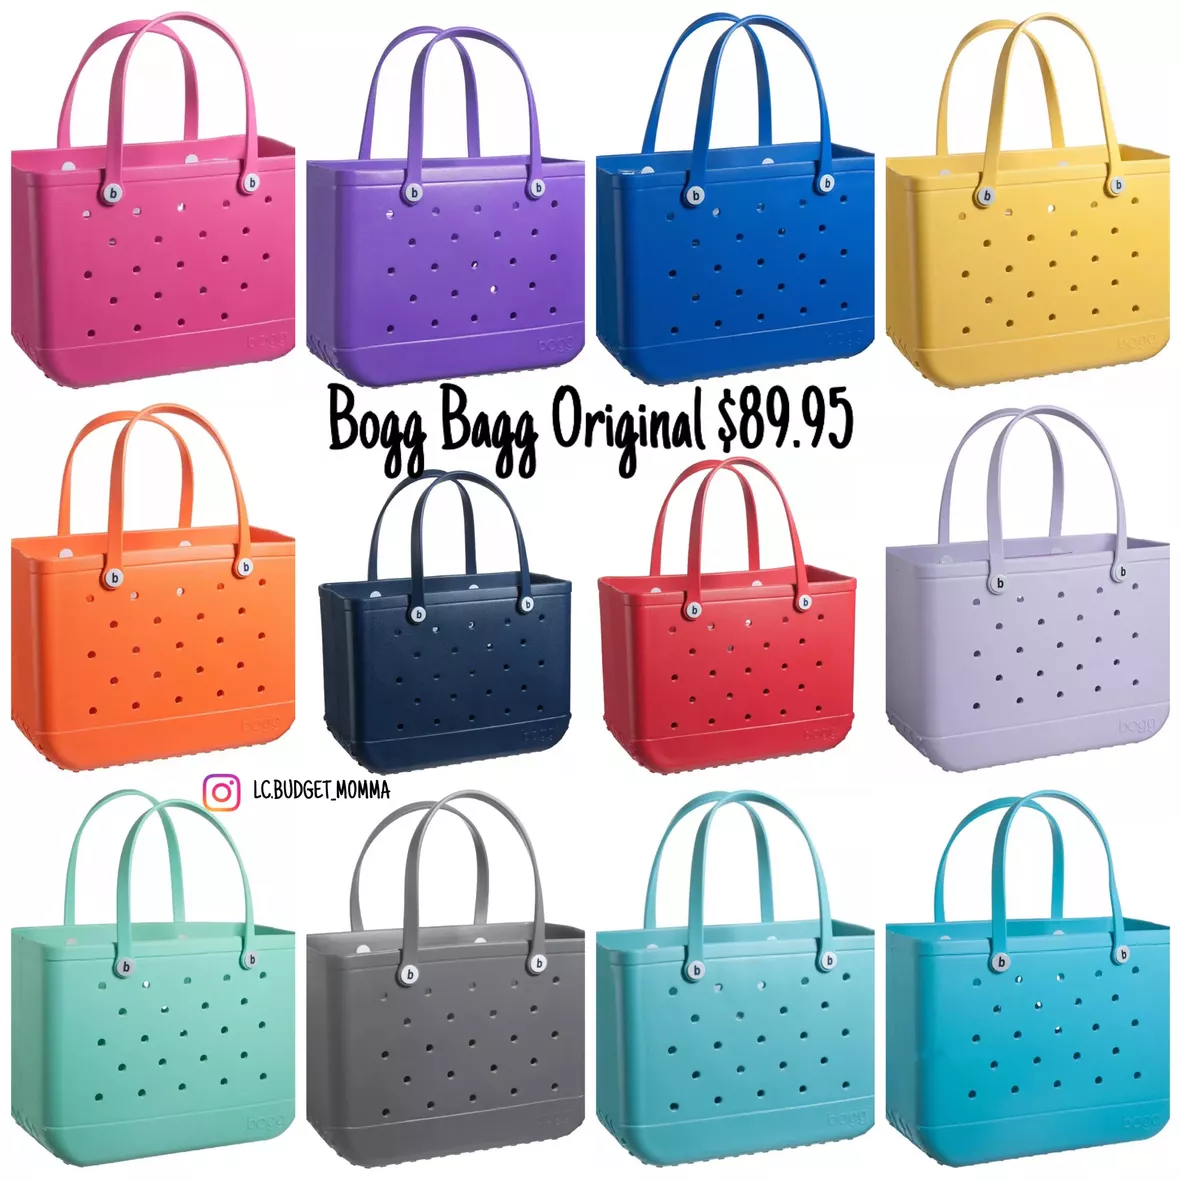 Baby Bogg Bag curated on LTK